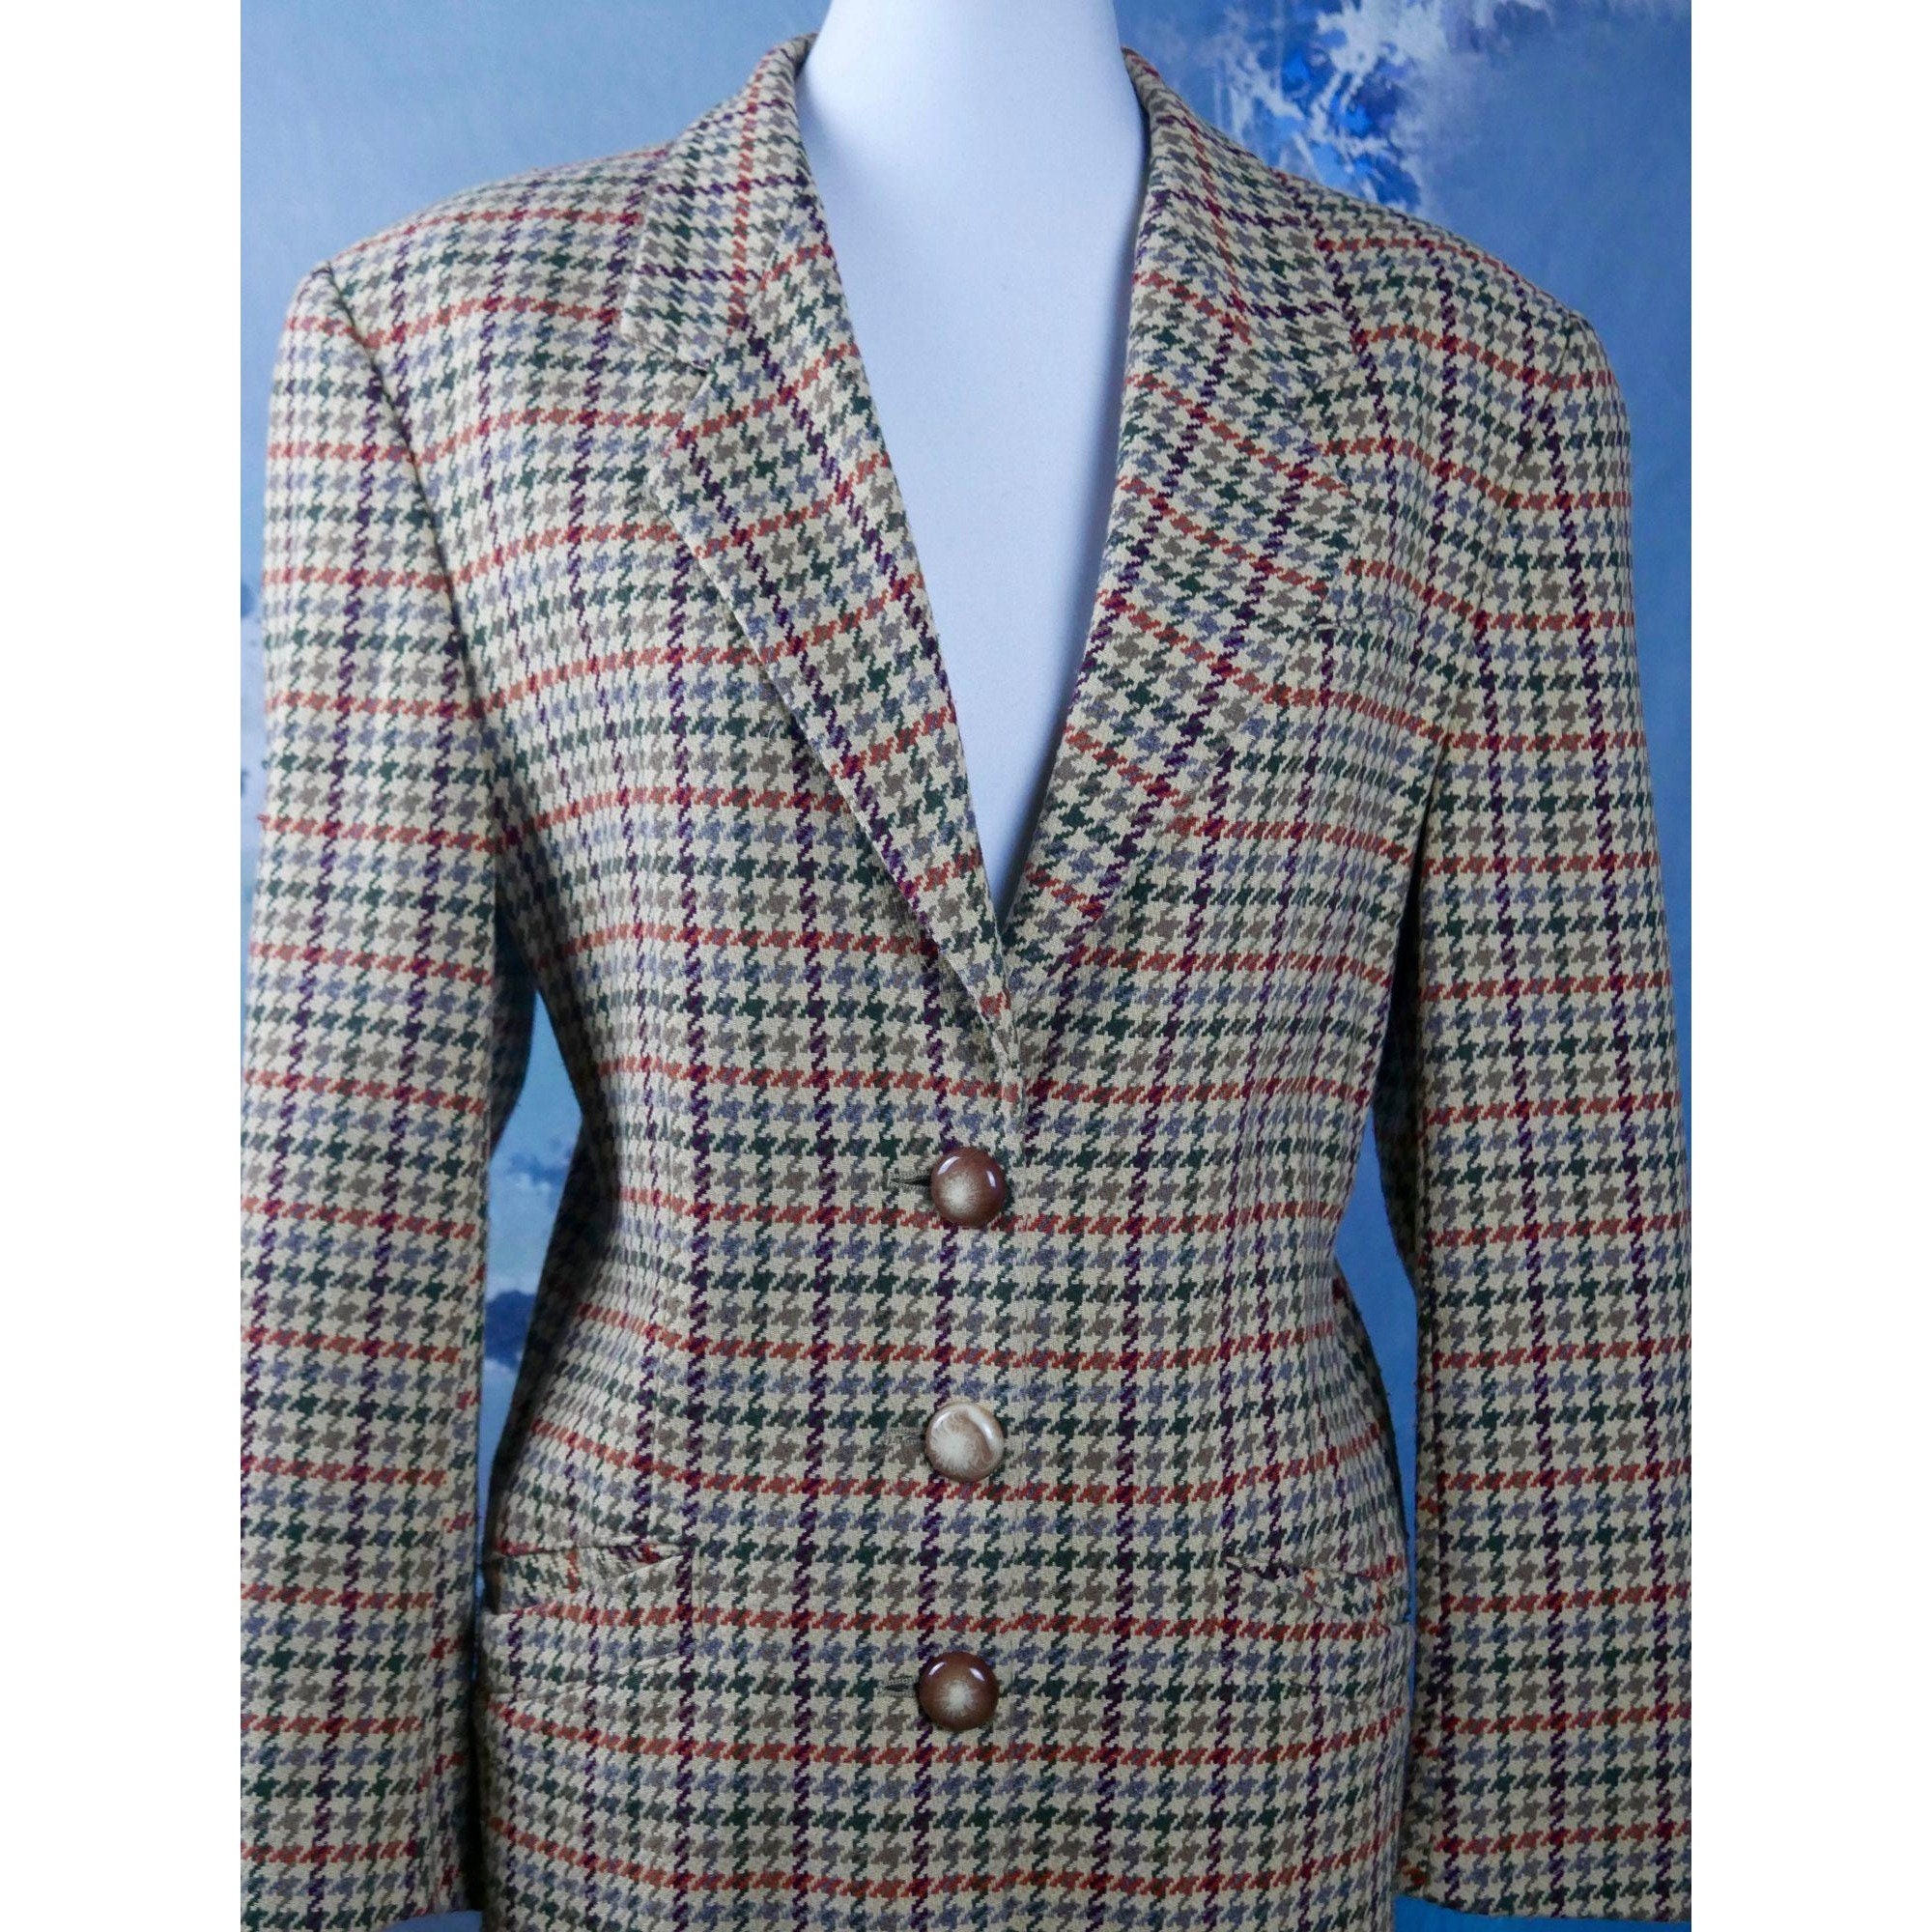 Tan Houndstooth Blazer, Gun Club Check With Camel Gray Olive Green ...